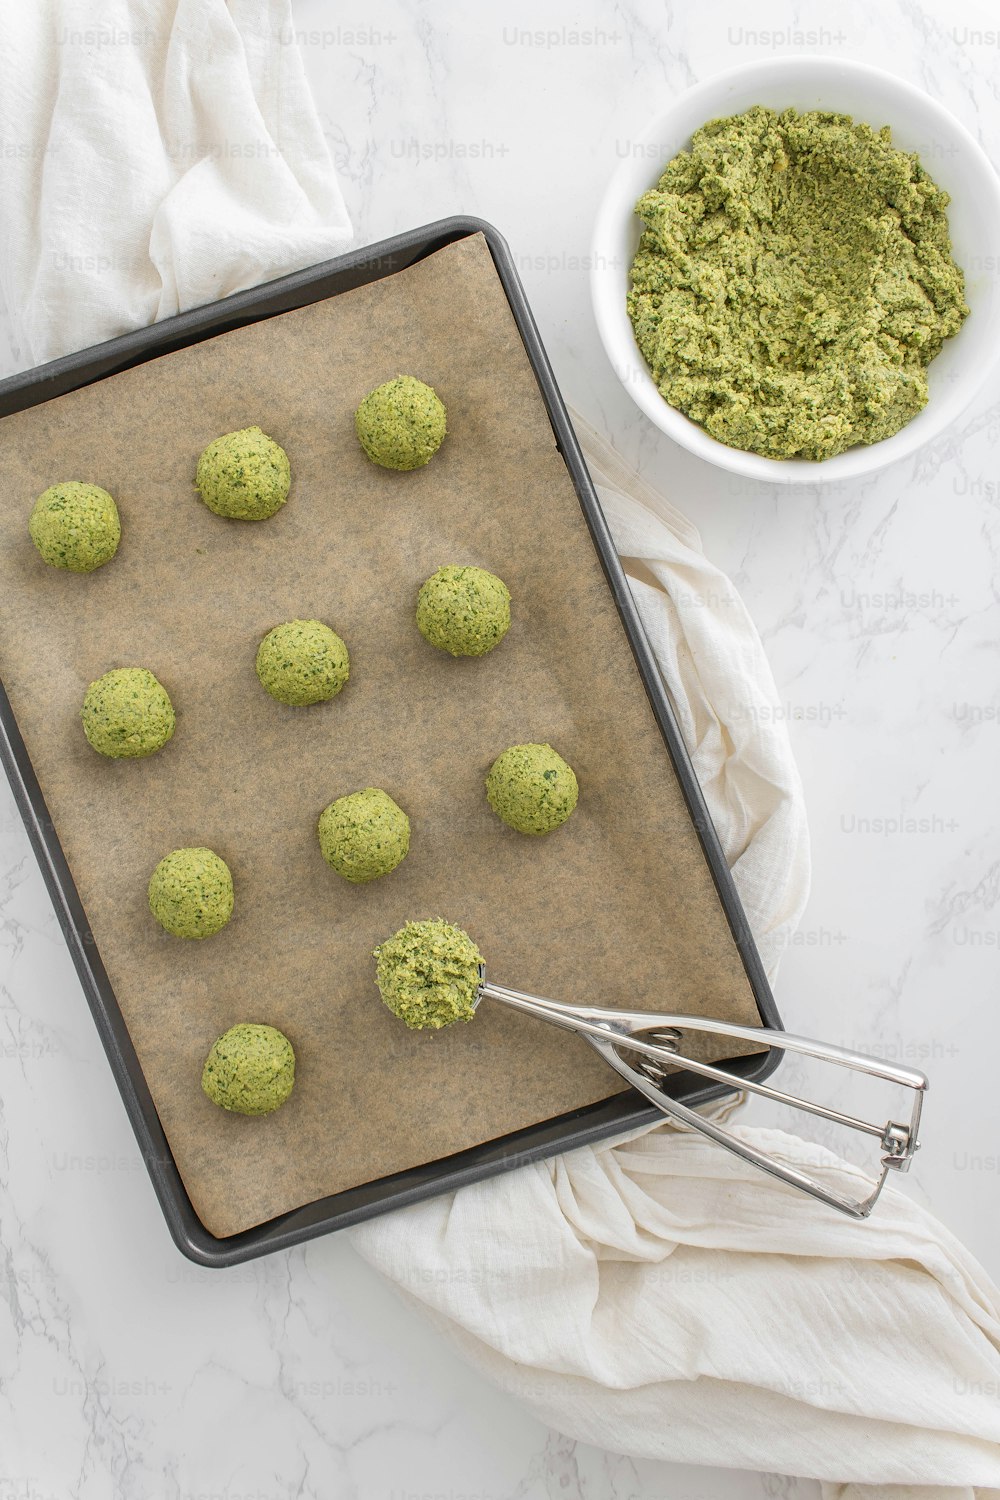 a cookie sheet with green cookies and a bowl of green powder